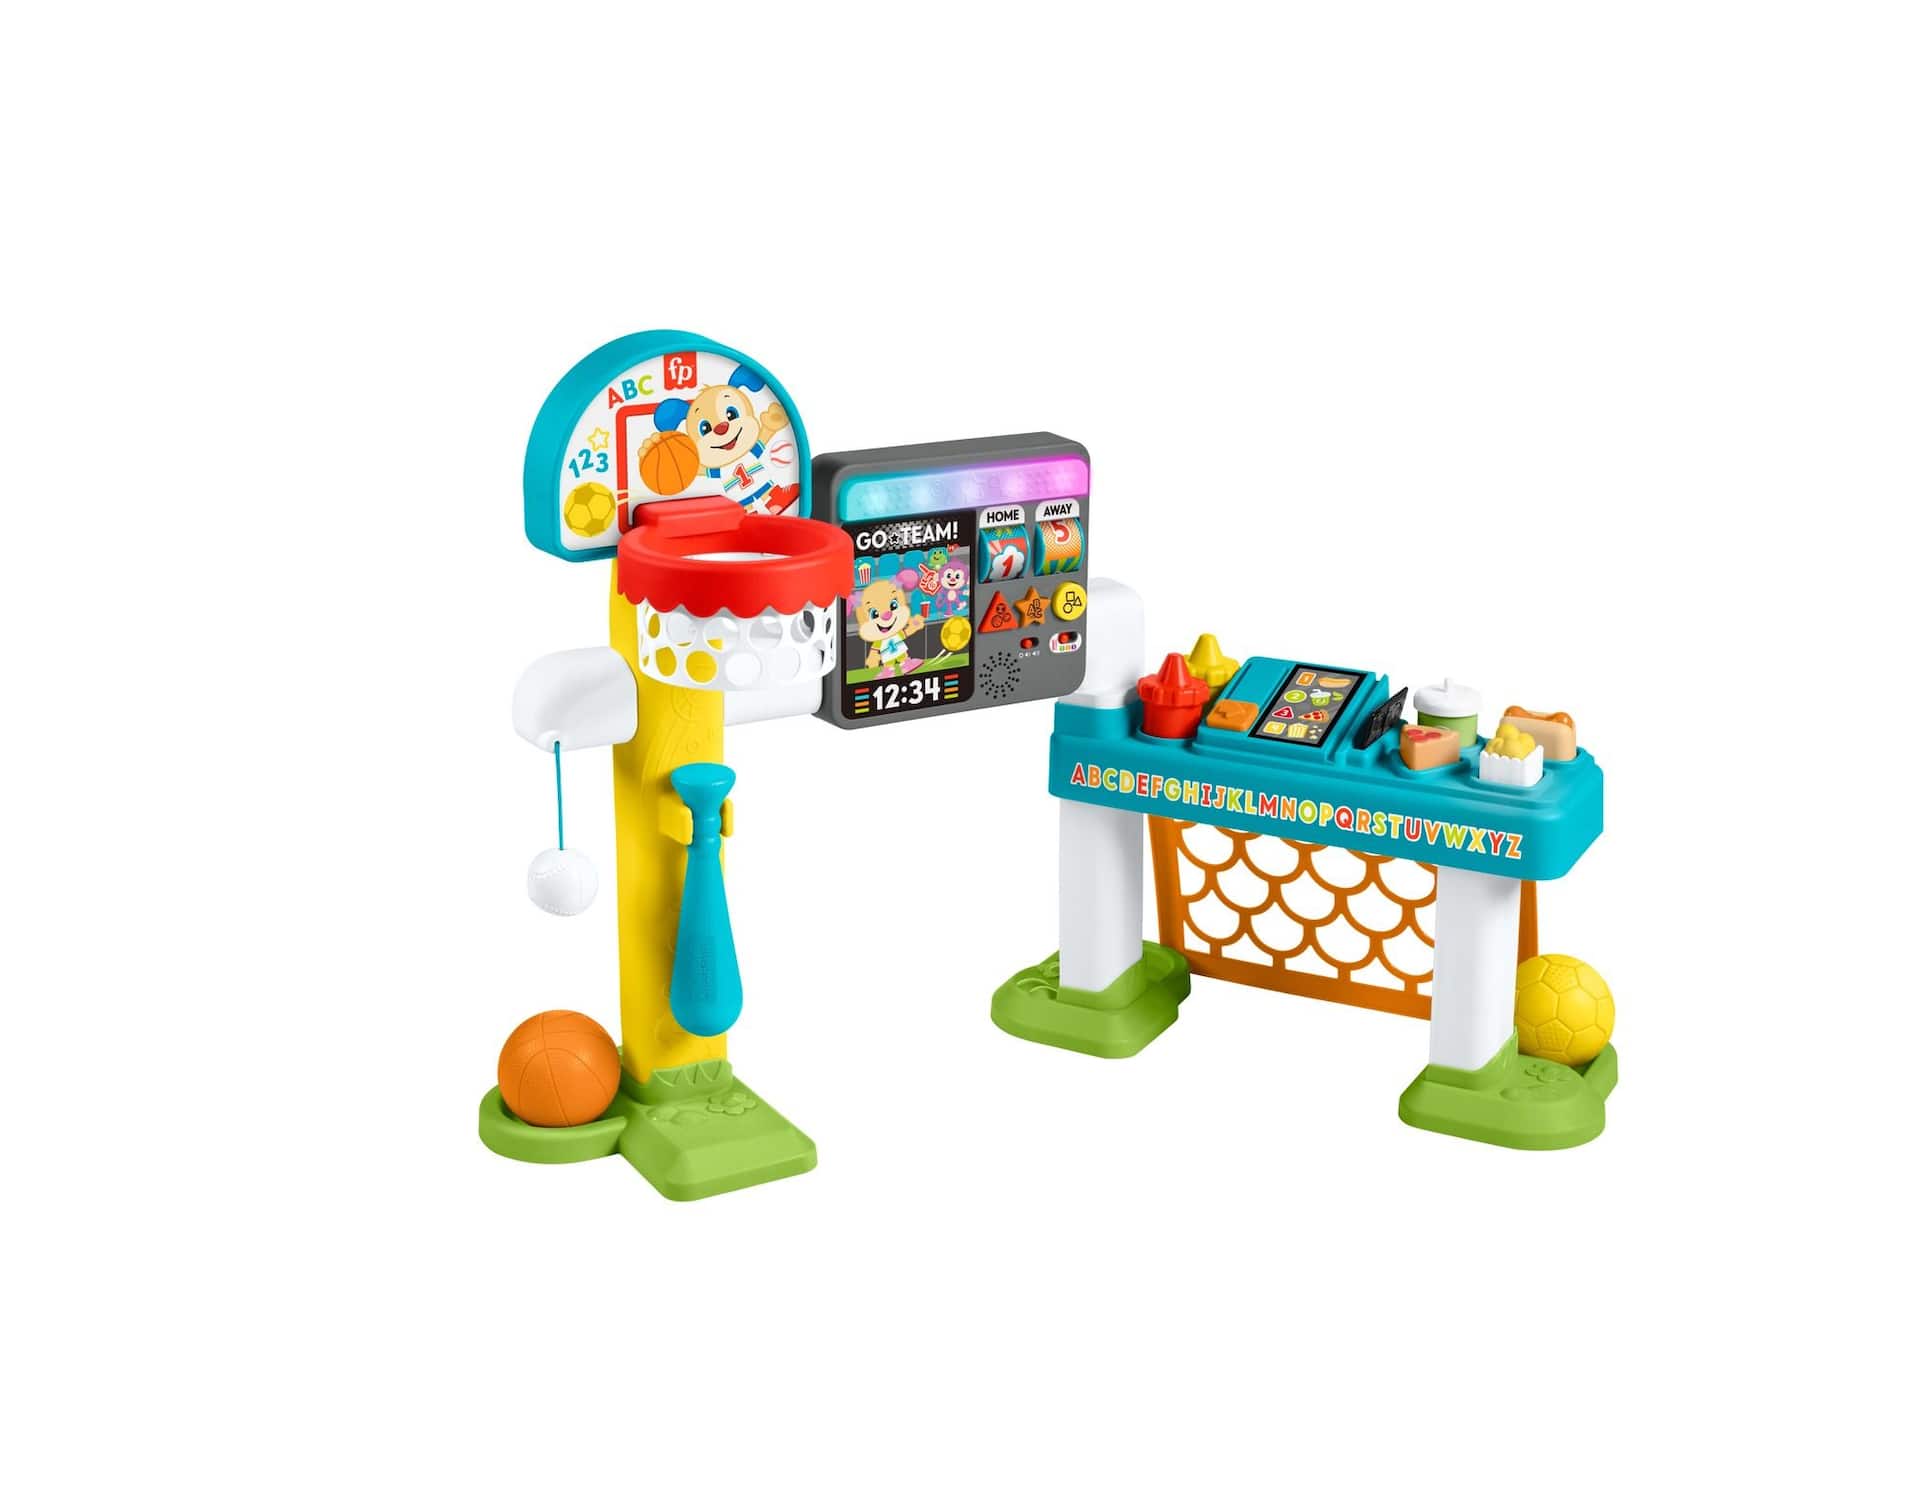 Fisher Price Little People Light-Up Learning Camper, Ages 1+